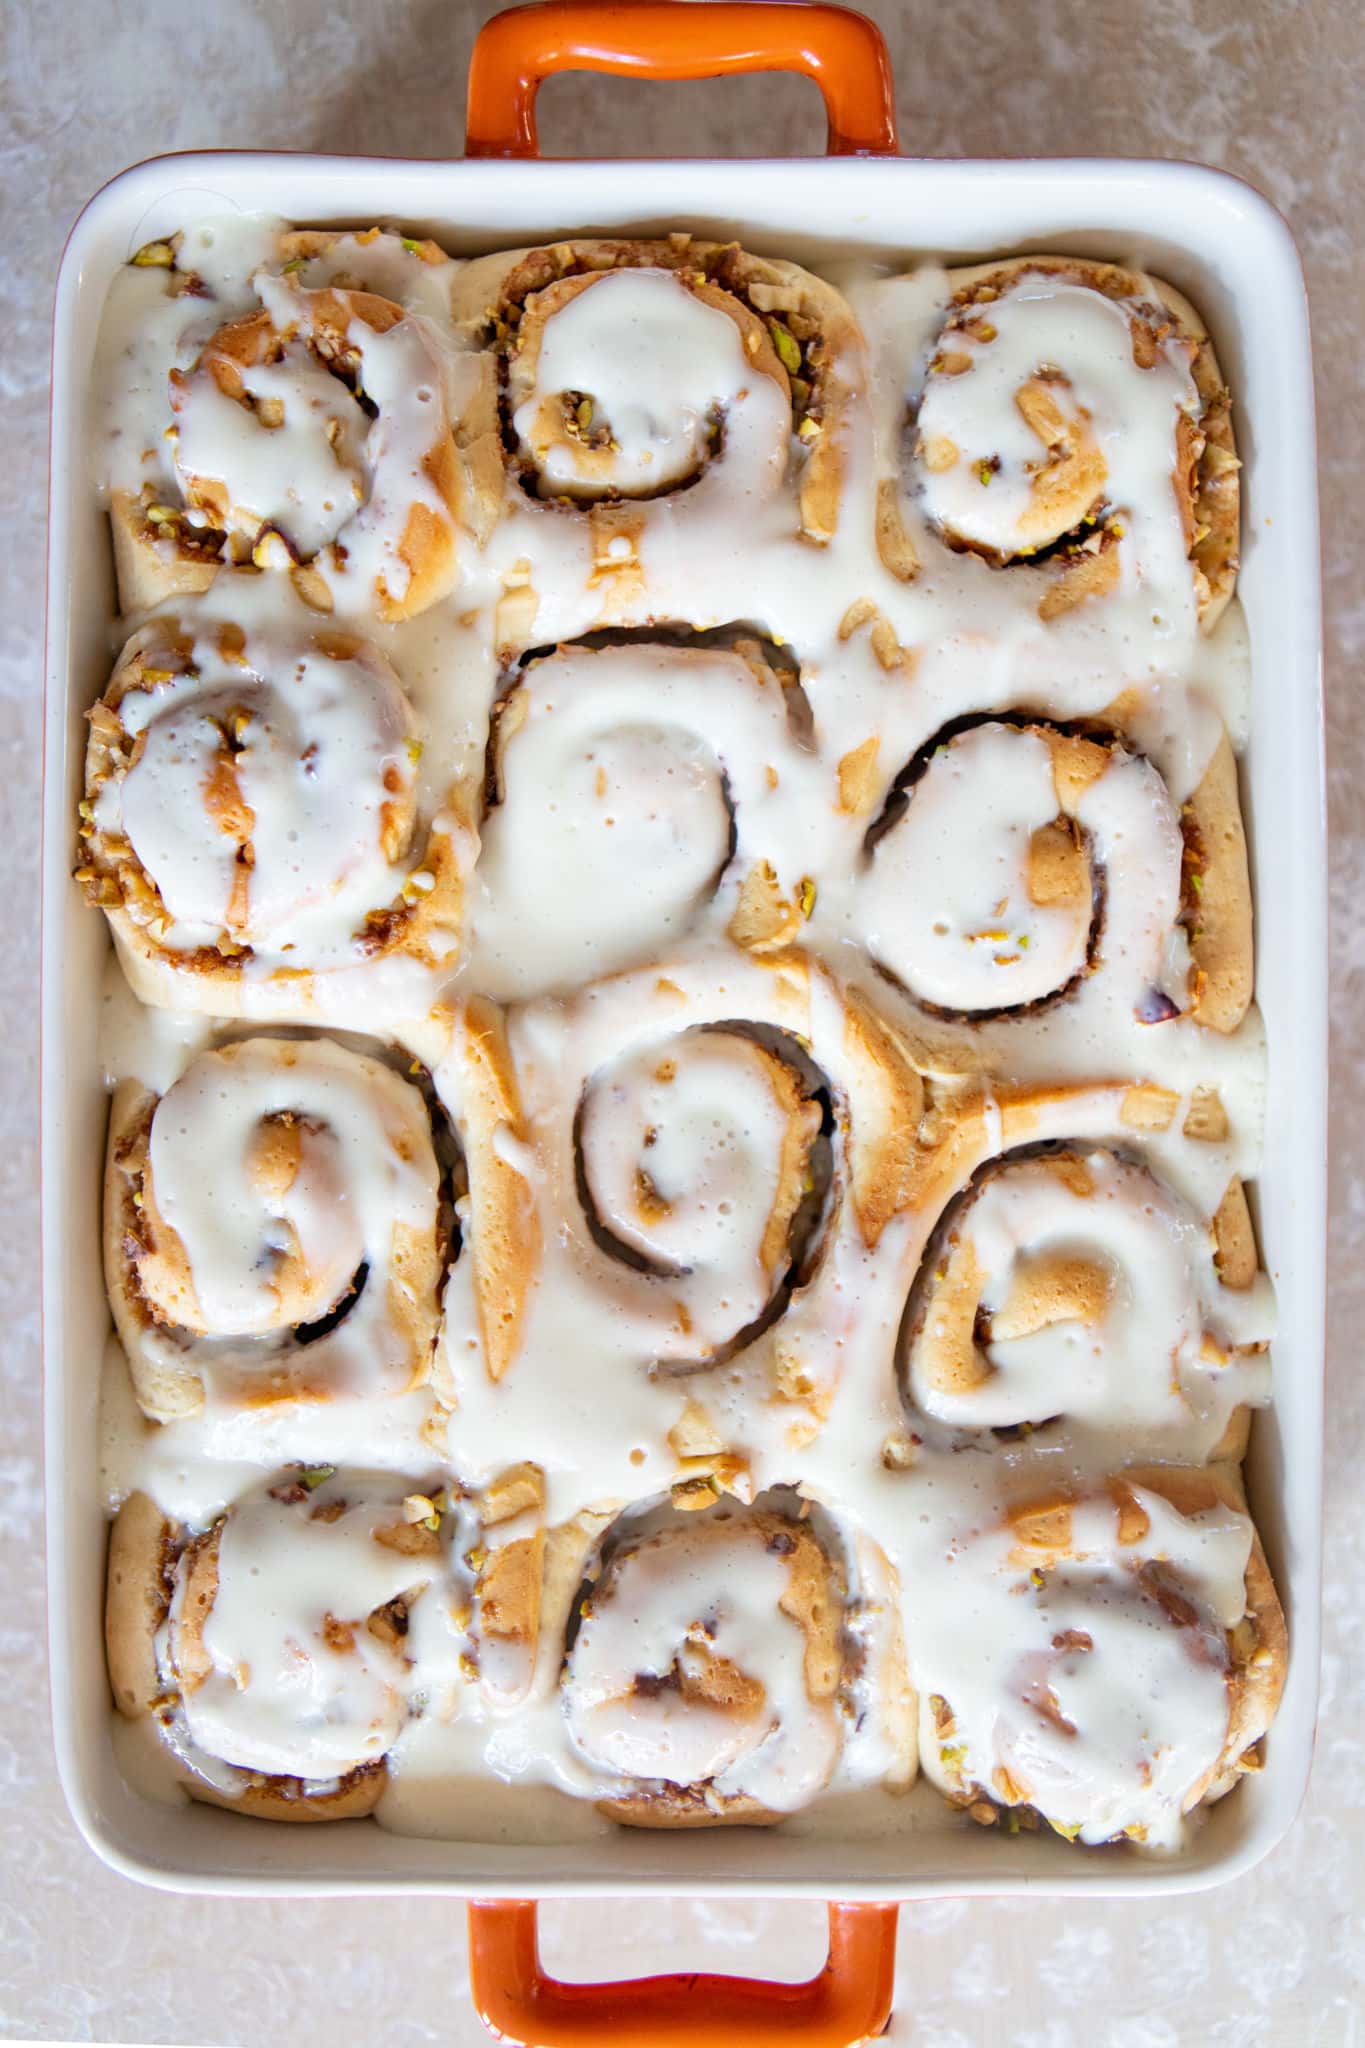 Cinnamon rolls with toppings.